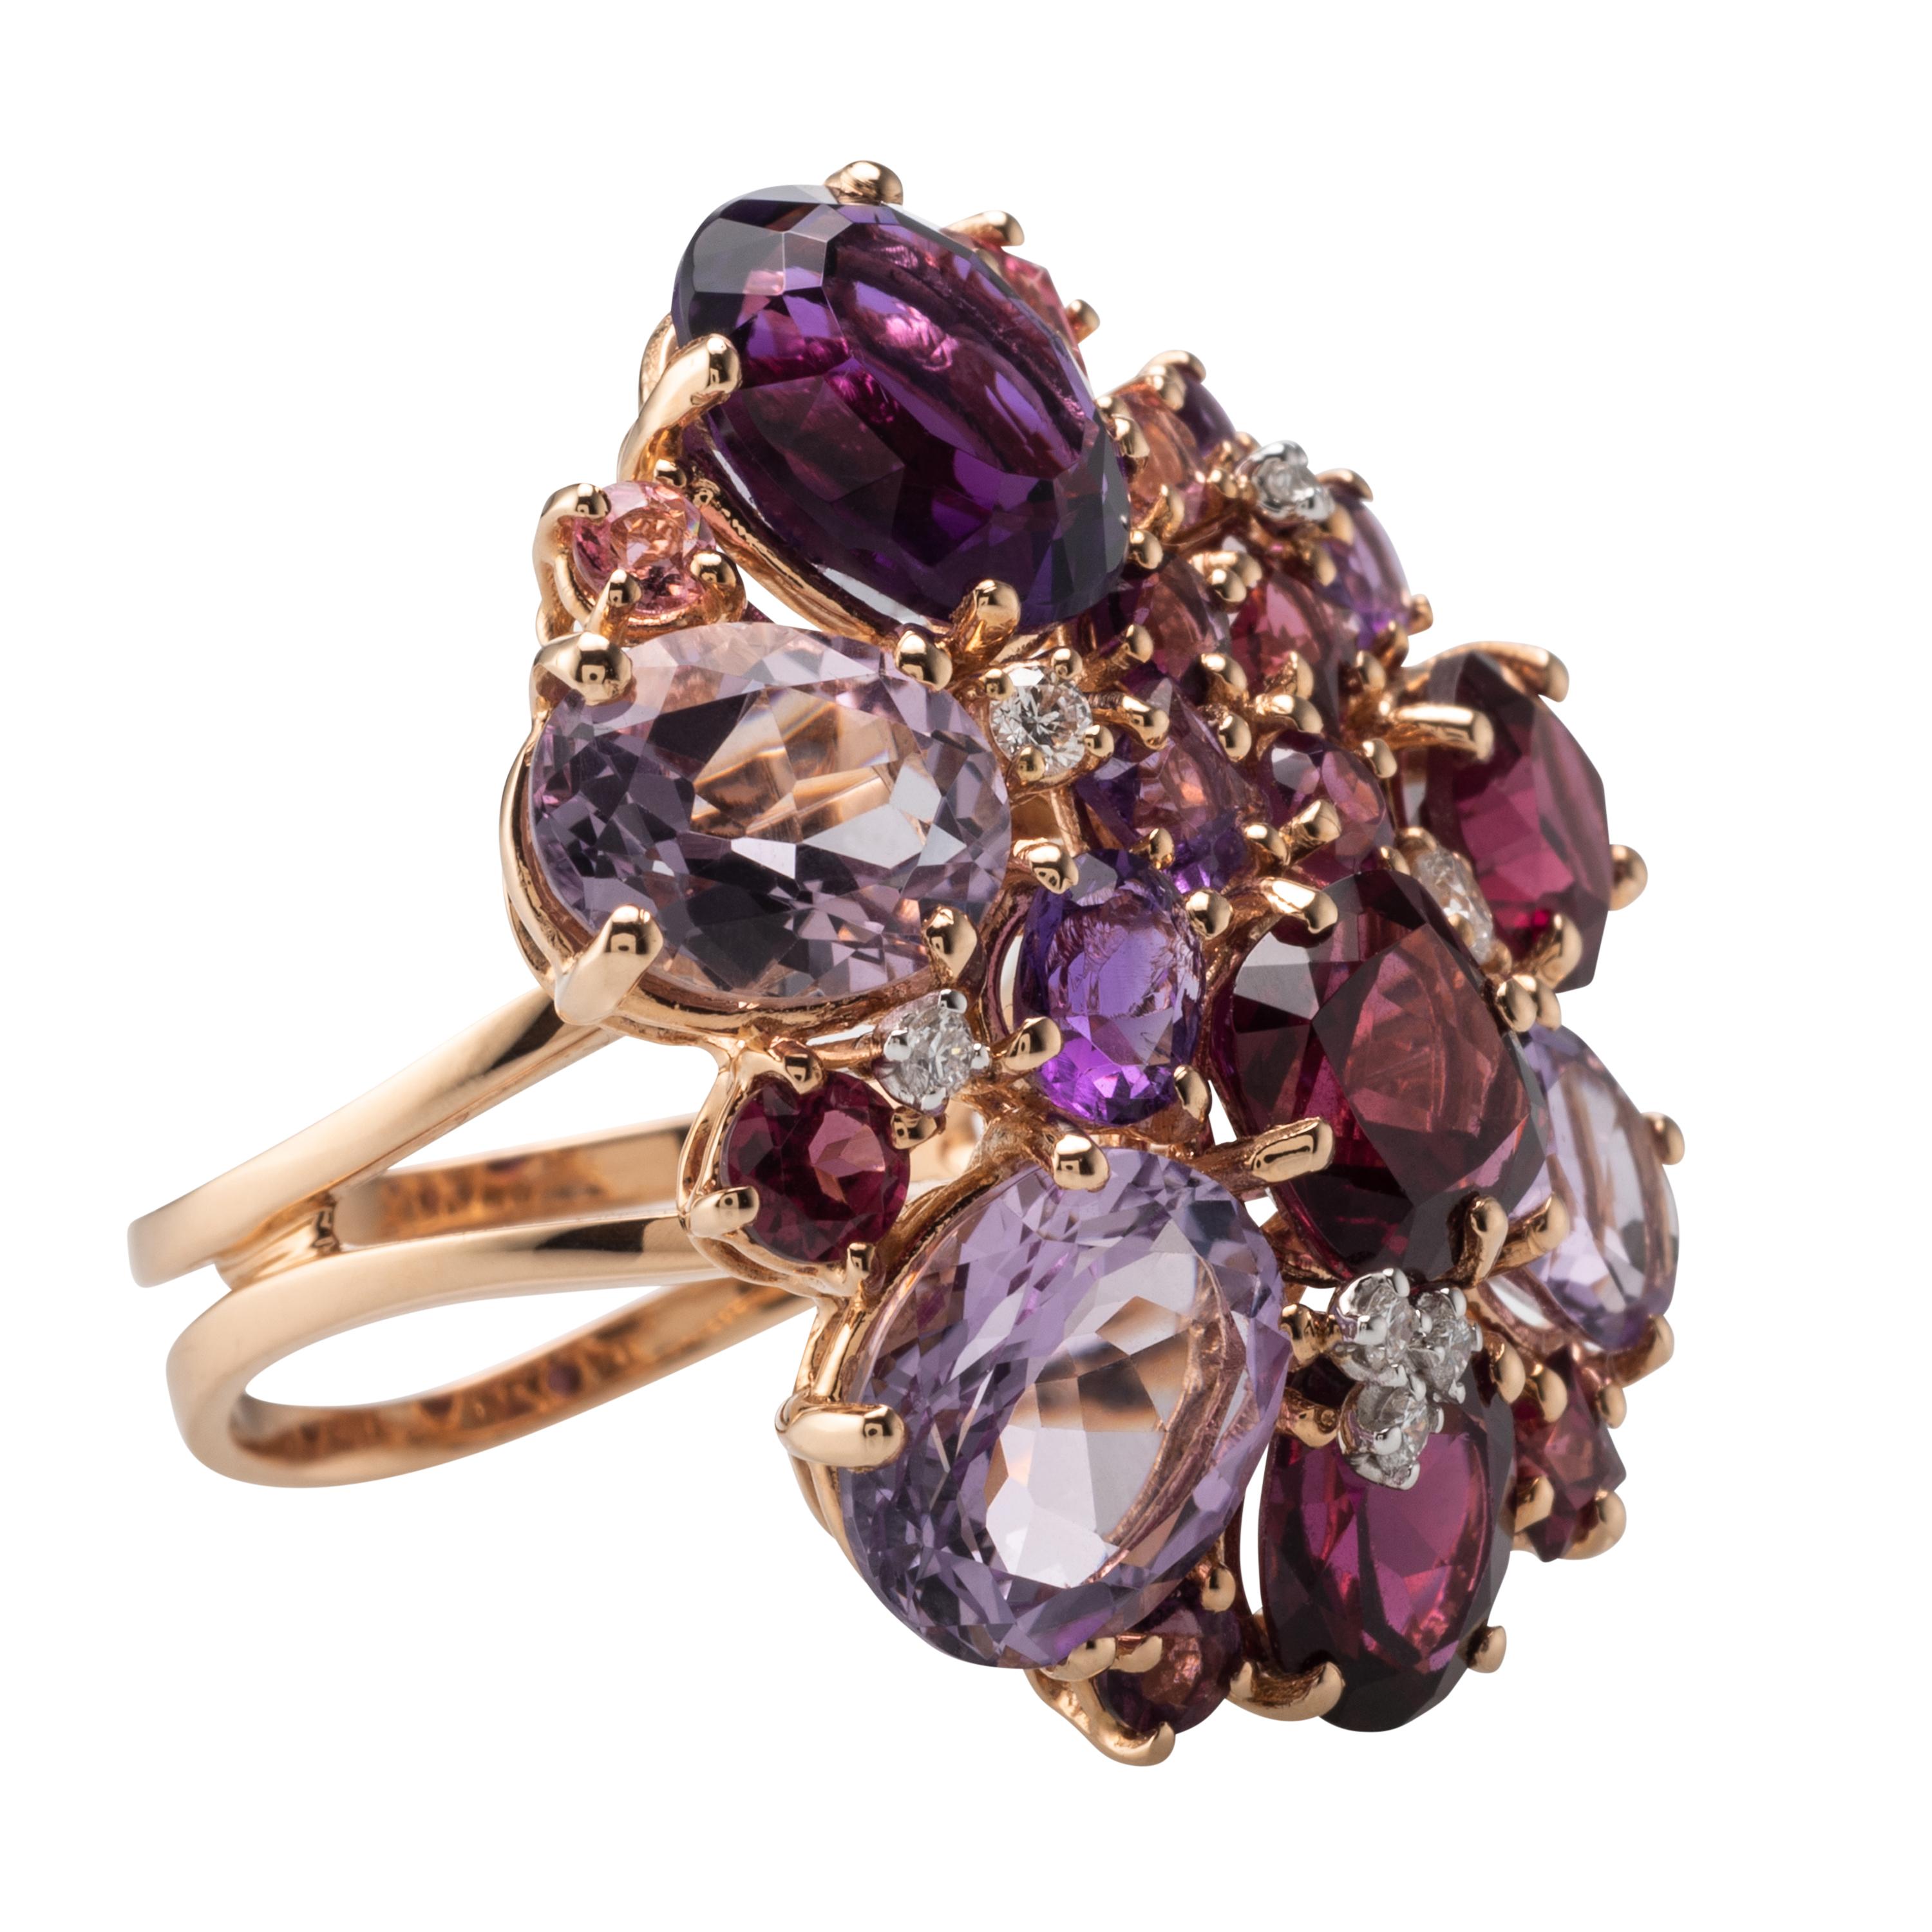 This Ring features Amethysts, Garnets and Diamonds. Produced in Italy.
Gemstones 15.5 Carat, Diamonds 0.18 Carat. 
Ring can be resized upon request.